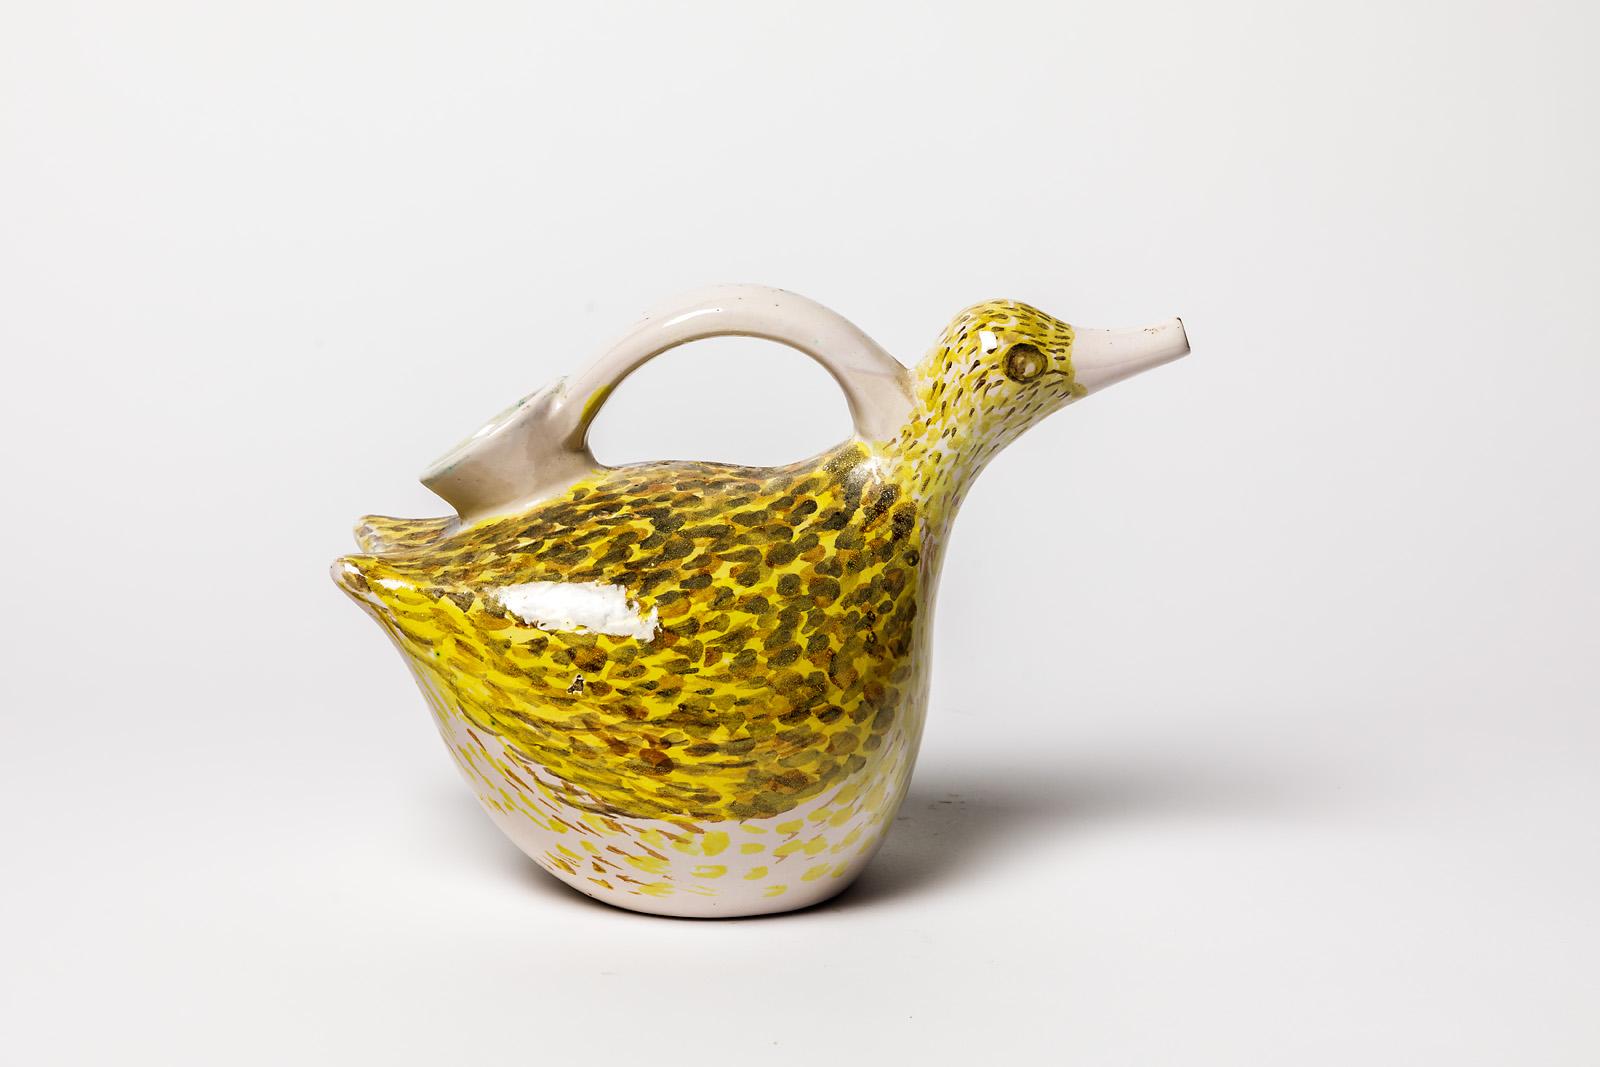 20th Century XXth Century White and Yellow Ceramic Bird Pitcher by Pierre Roulot 1951 For Sale